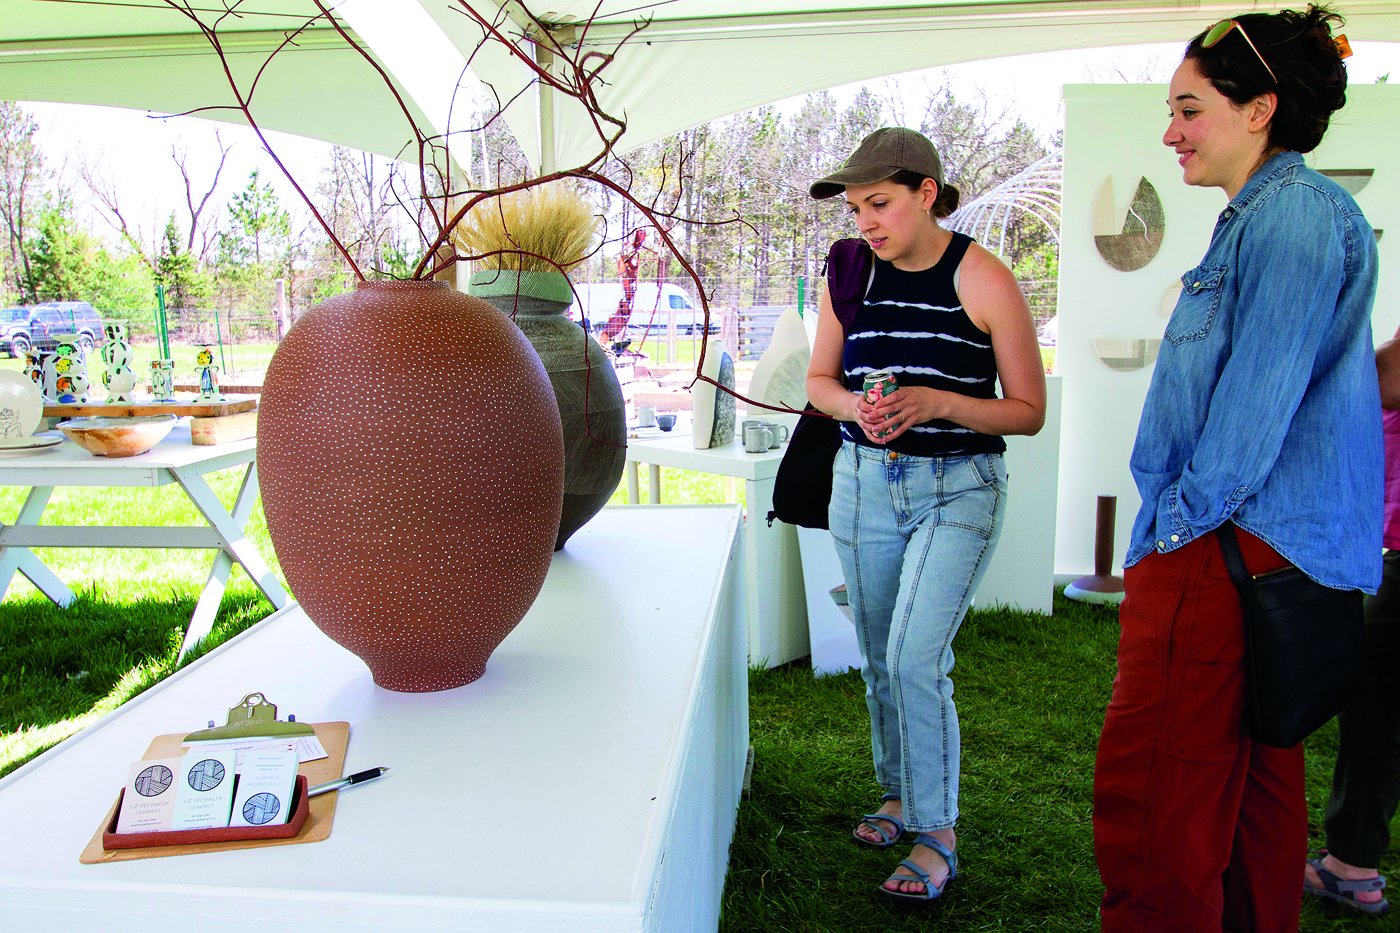 Customer looking at pottery work on the lawn of Ani Kasten's home studio.